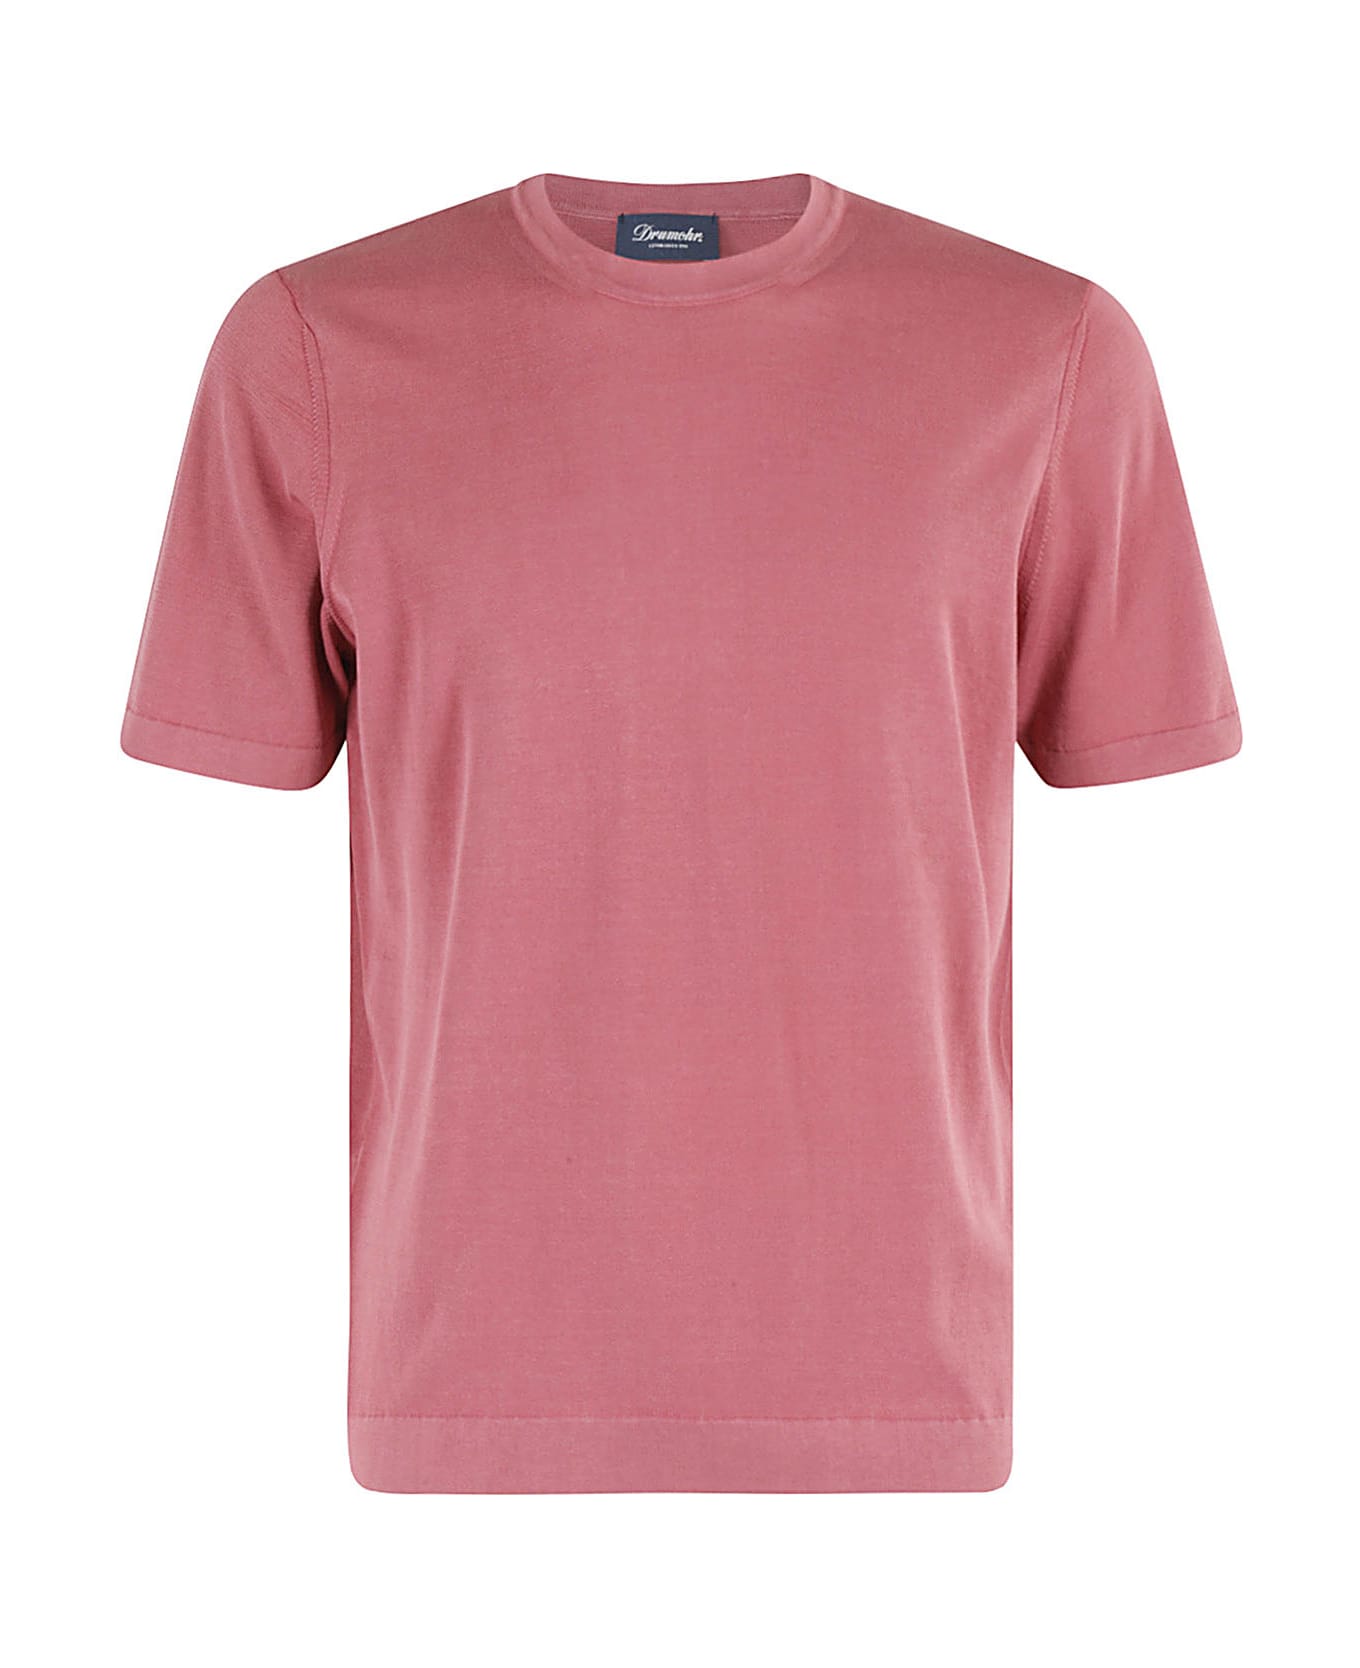 Drumohr T Shirt Mc T Frosted - Rosa